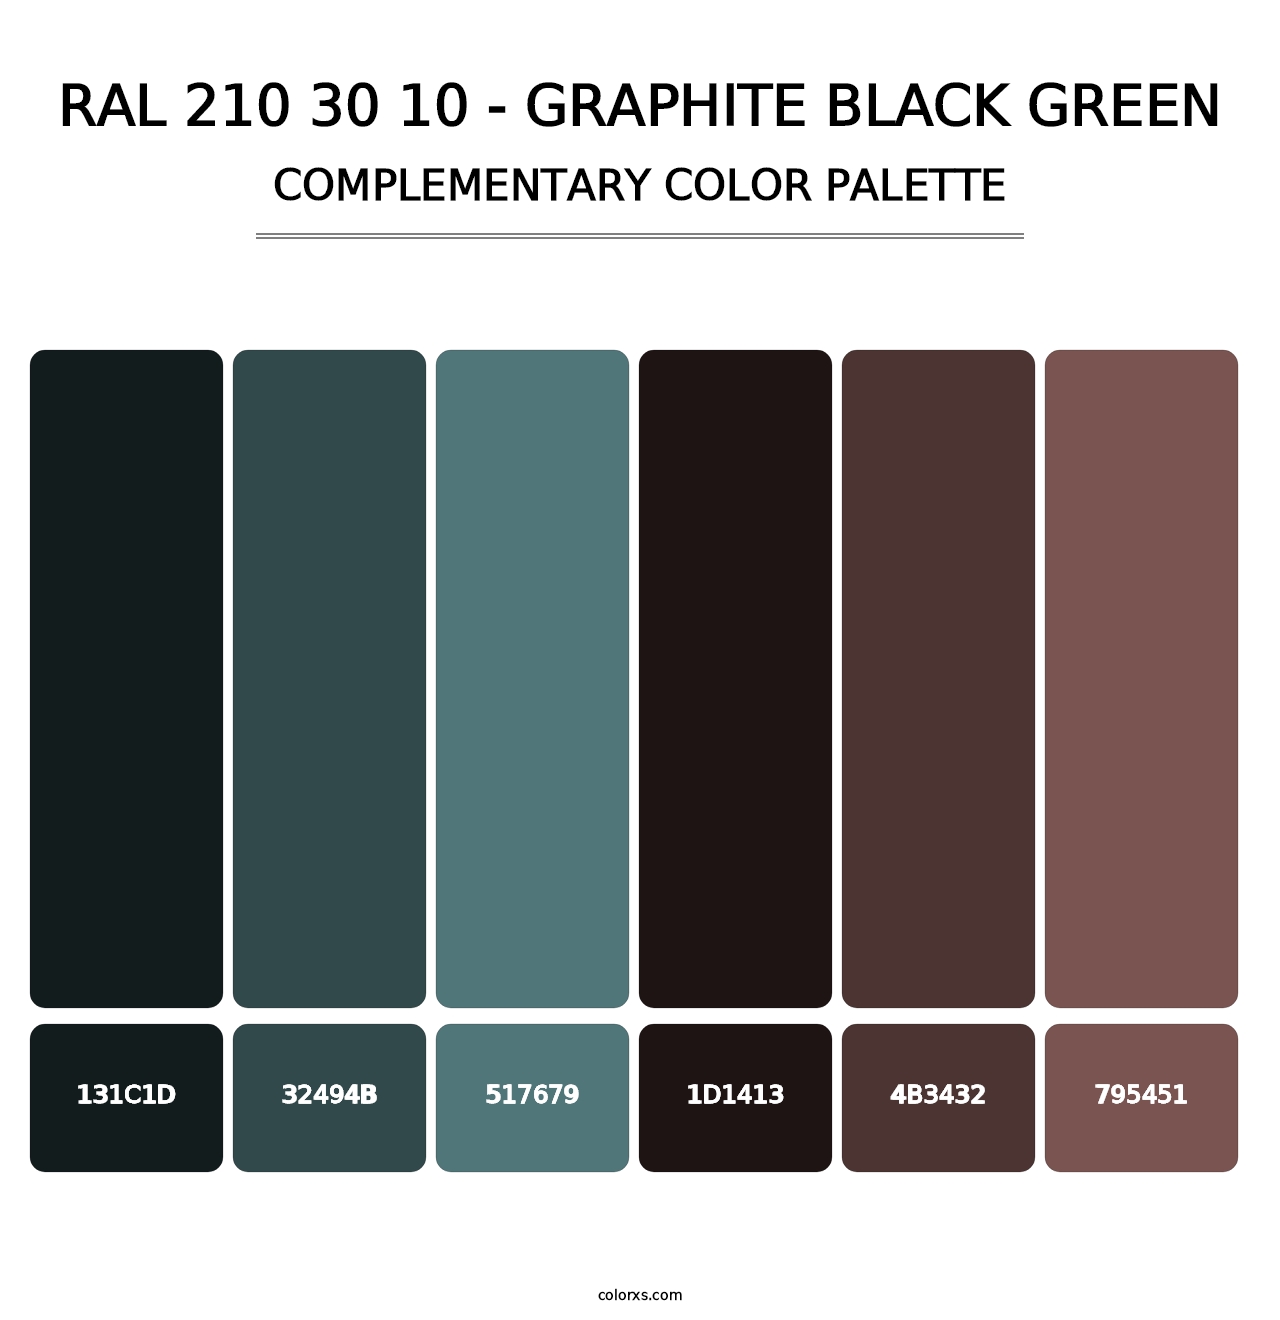 RAL 210 30 10 - Graphite Black Green - Complementary Color Palette